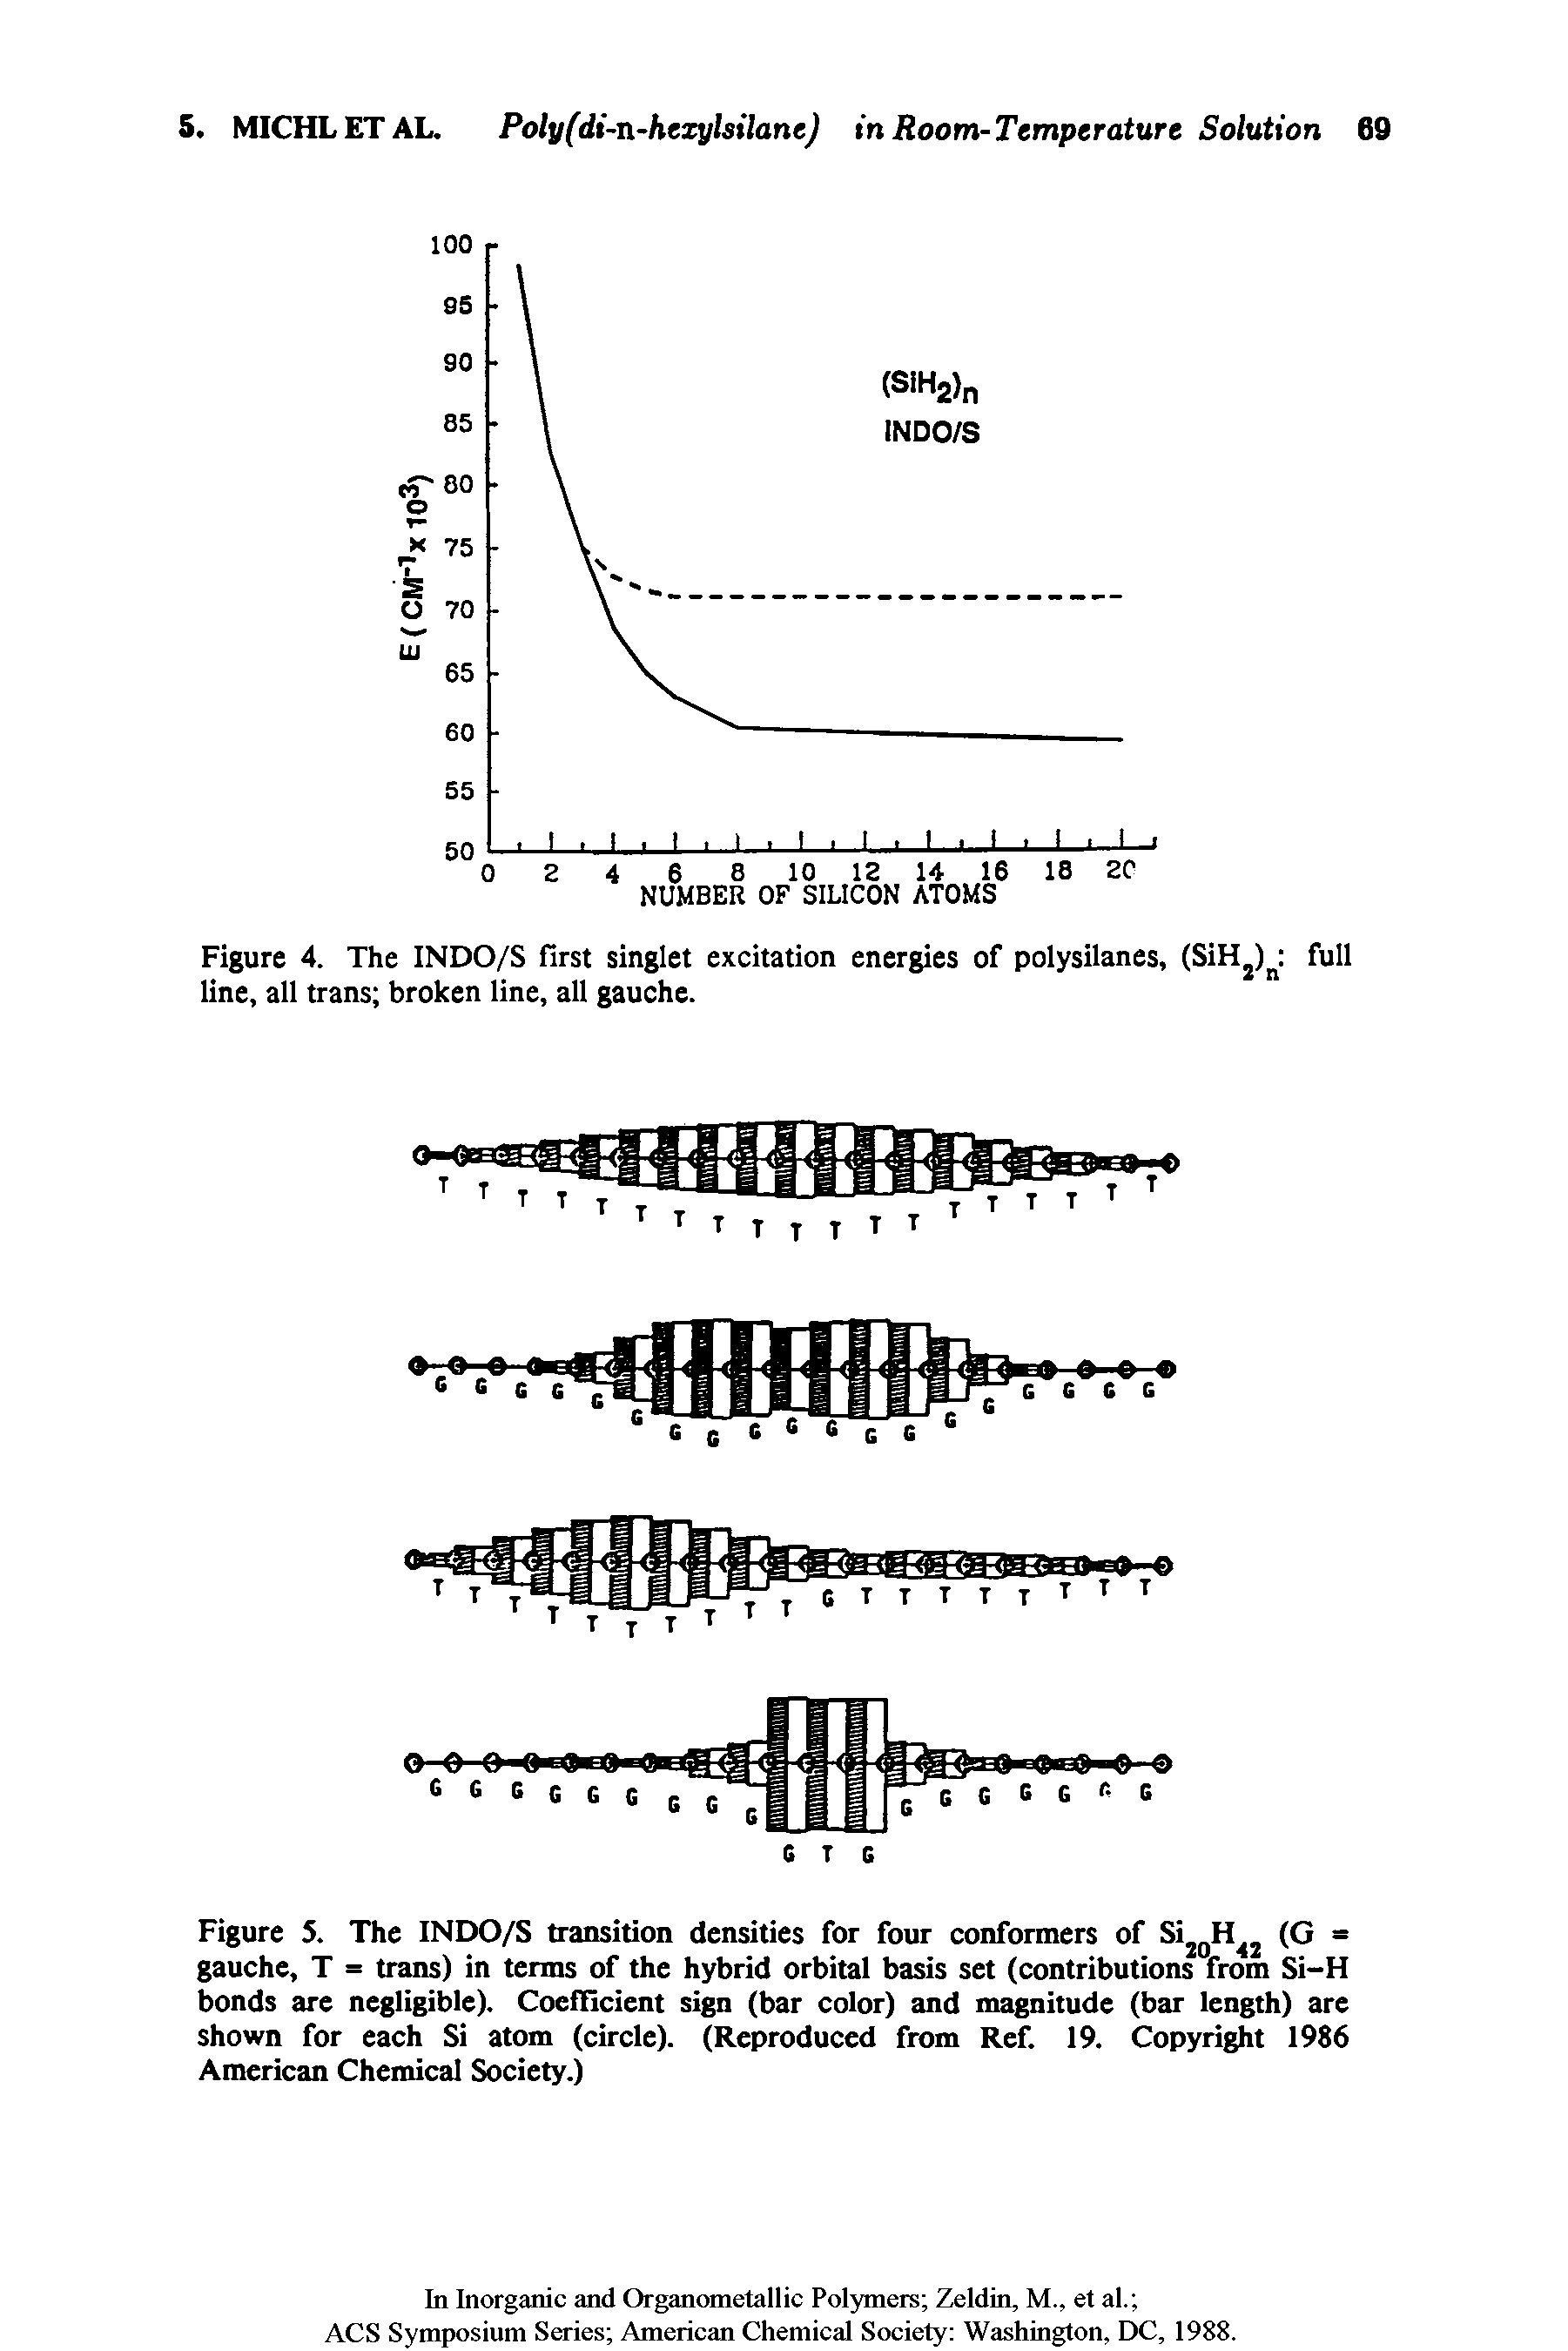 Figure 4. The INDO/S first singlet excitation energies of polysilanes, (SiH2)n full line, all trans broken line, all gauche.